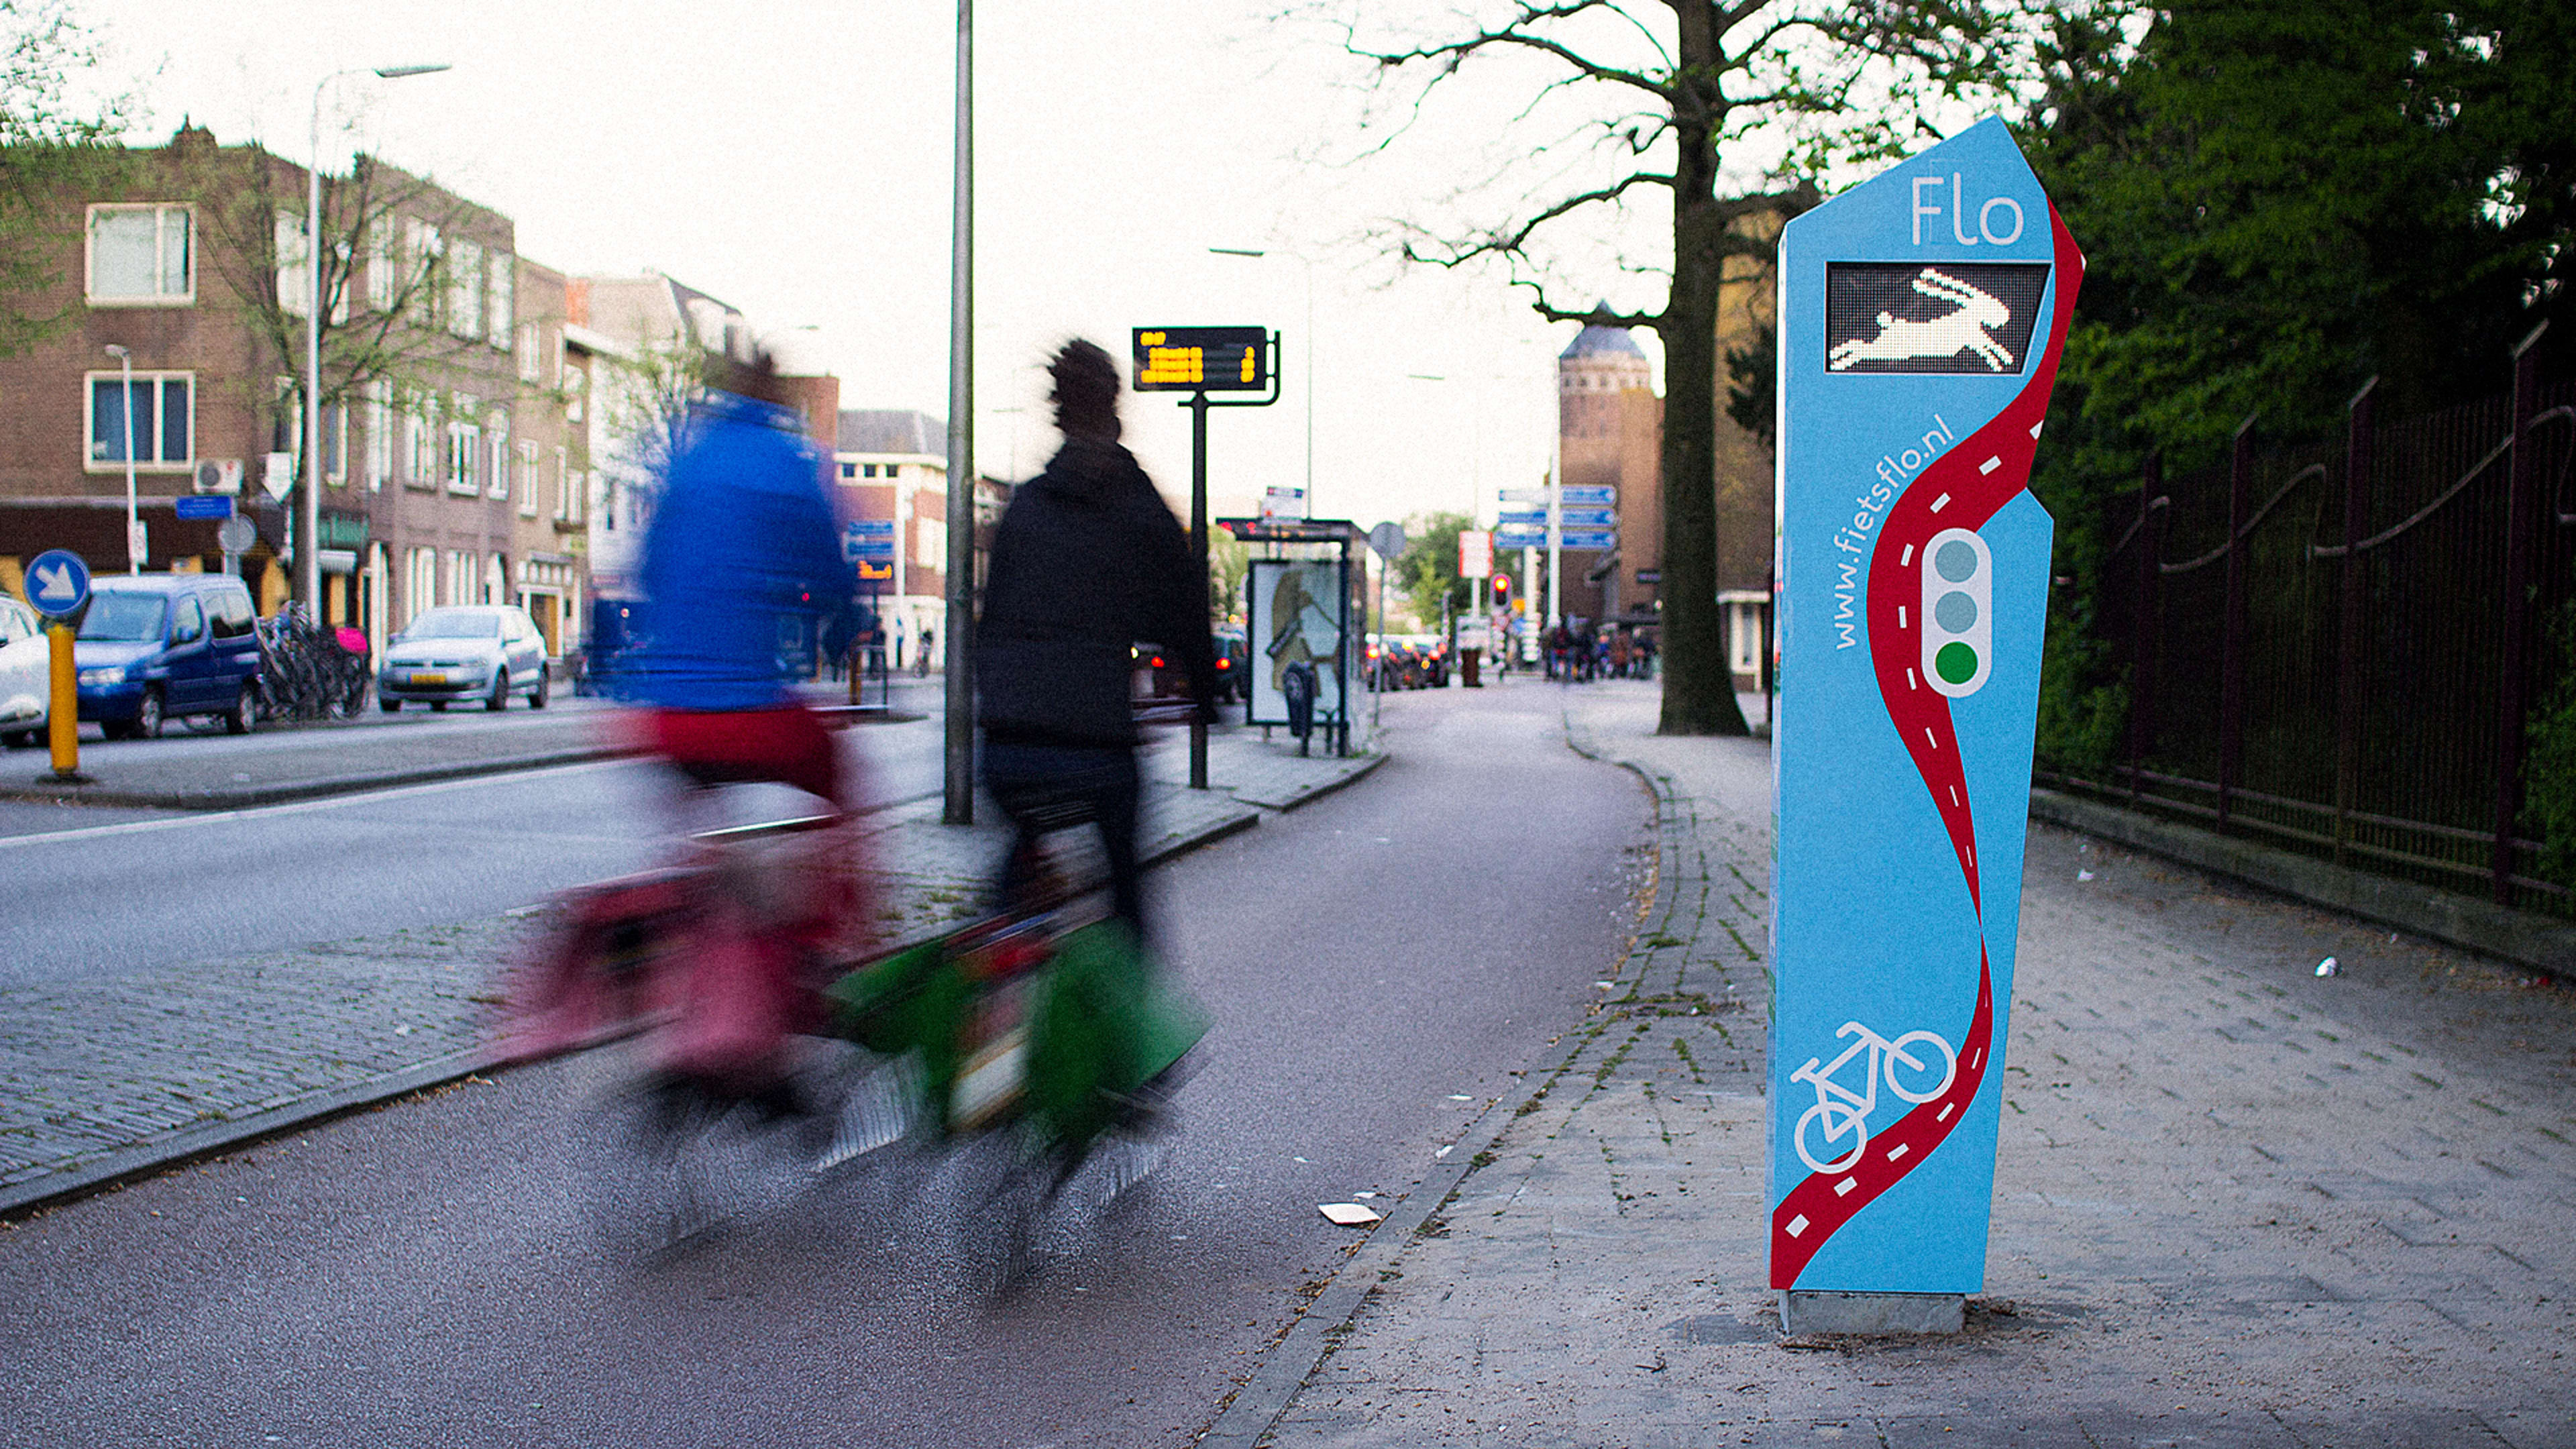 These Helpful Kiosks Tell You How Fast To Bike To Make The Next Light